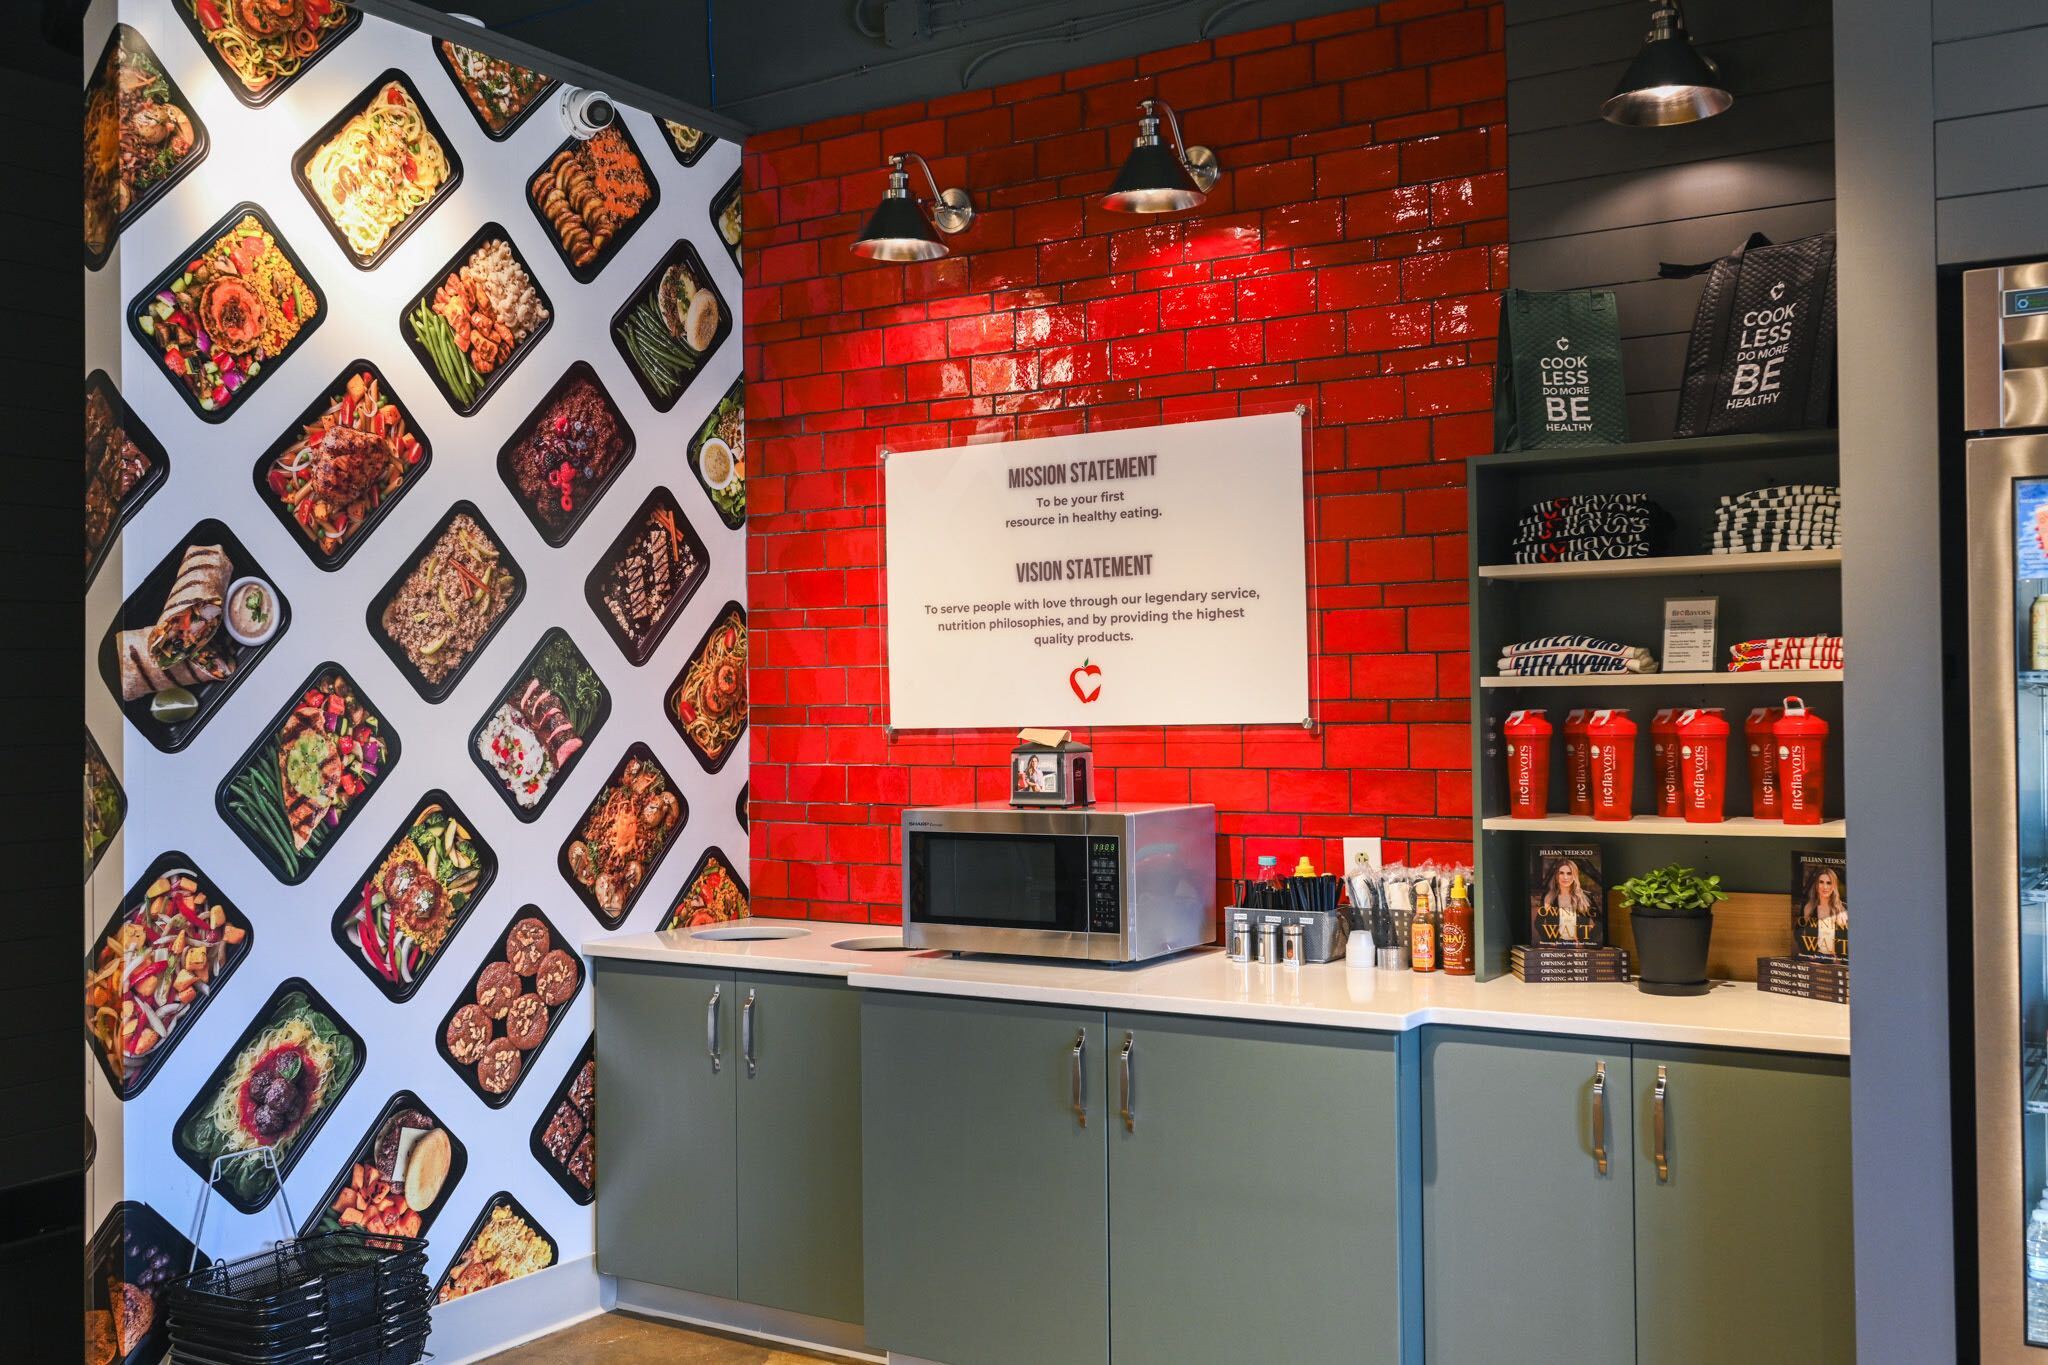 Image of the interior of Brentwood Fit Flavors